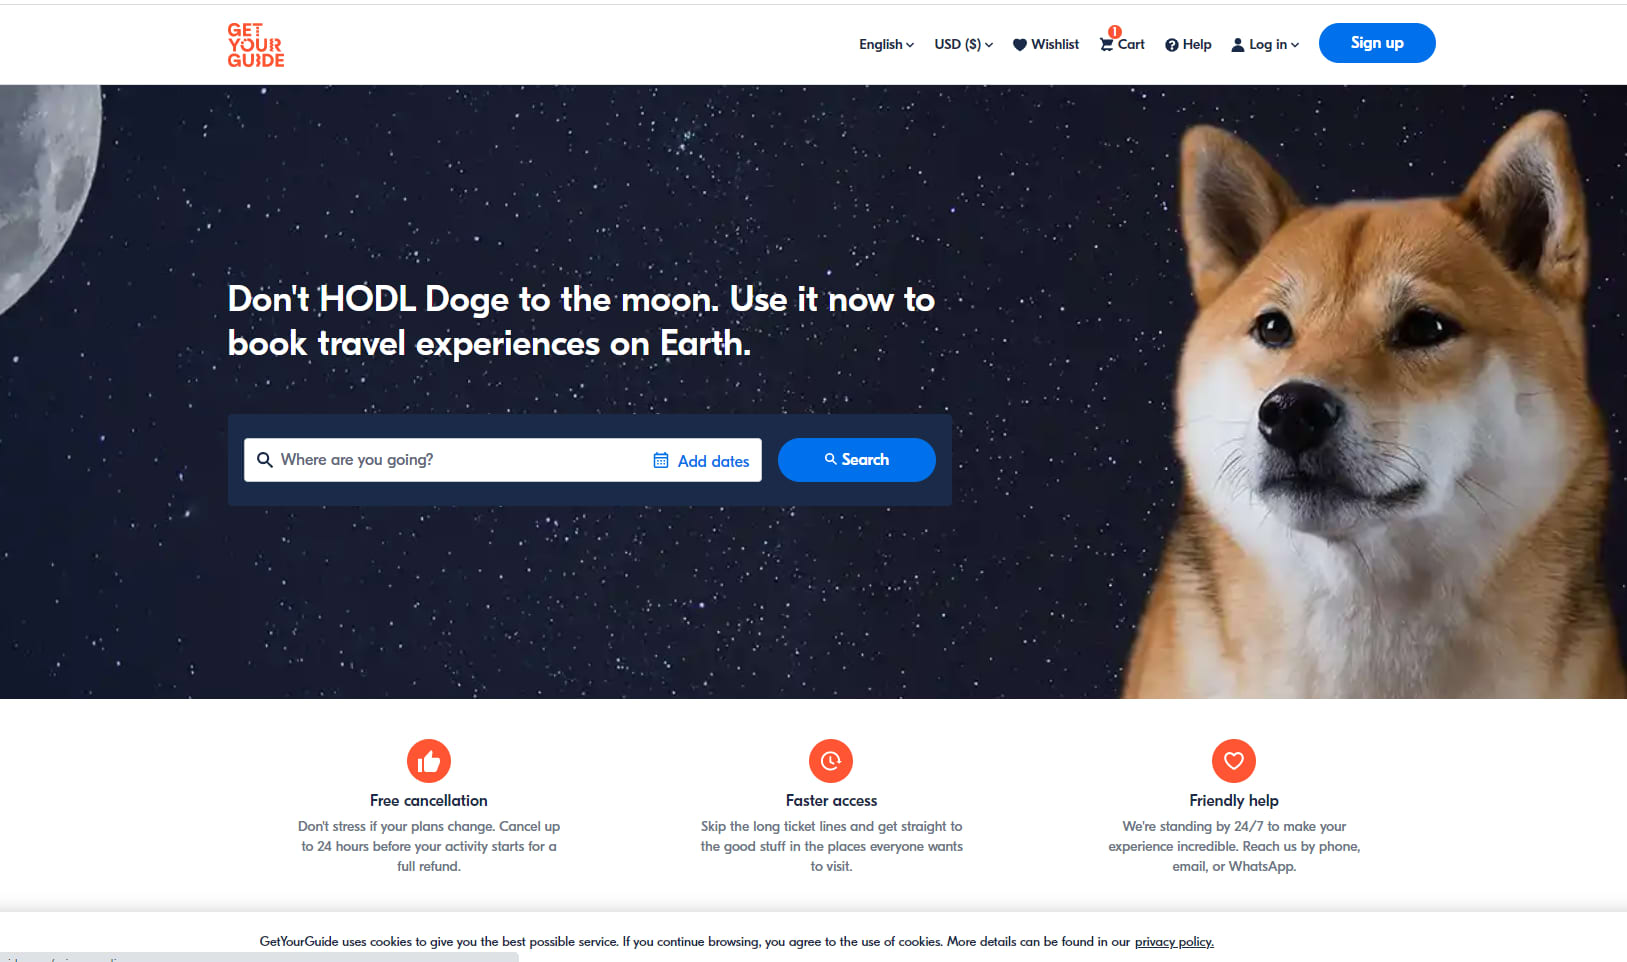 Dogecoin Airdrop » Claim free DOGE tokens (~ $10)